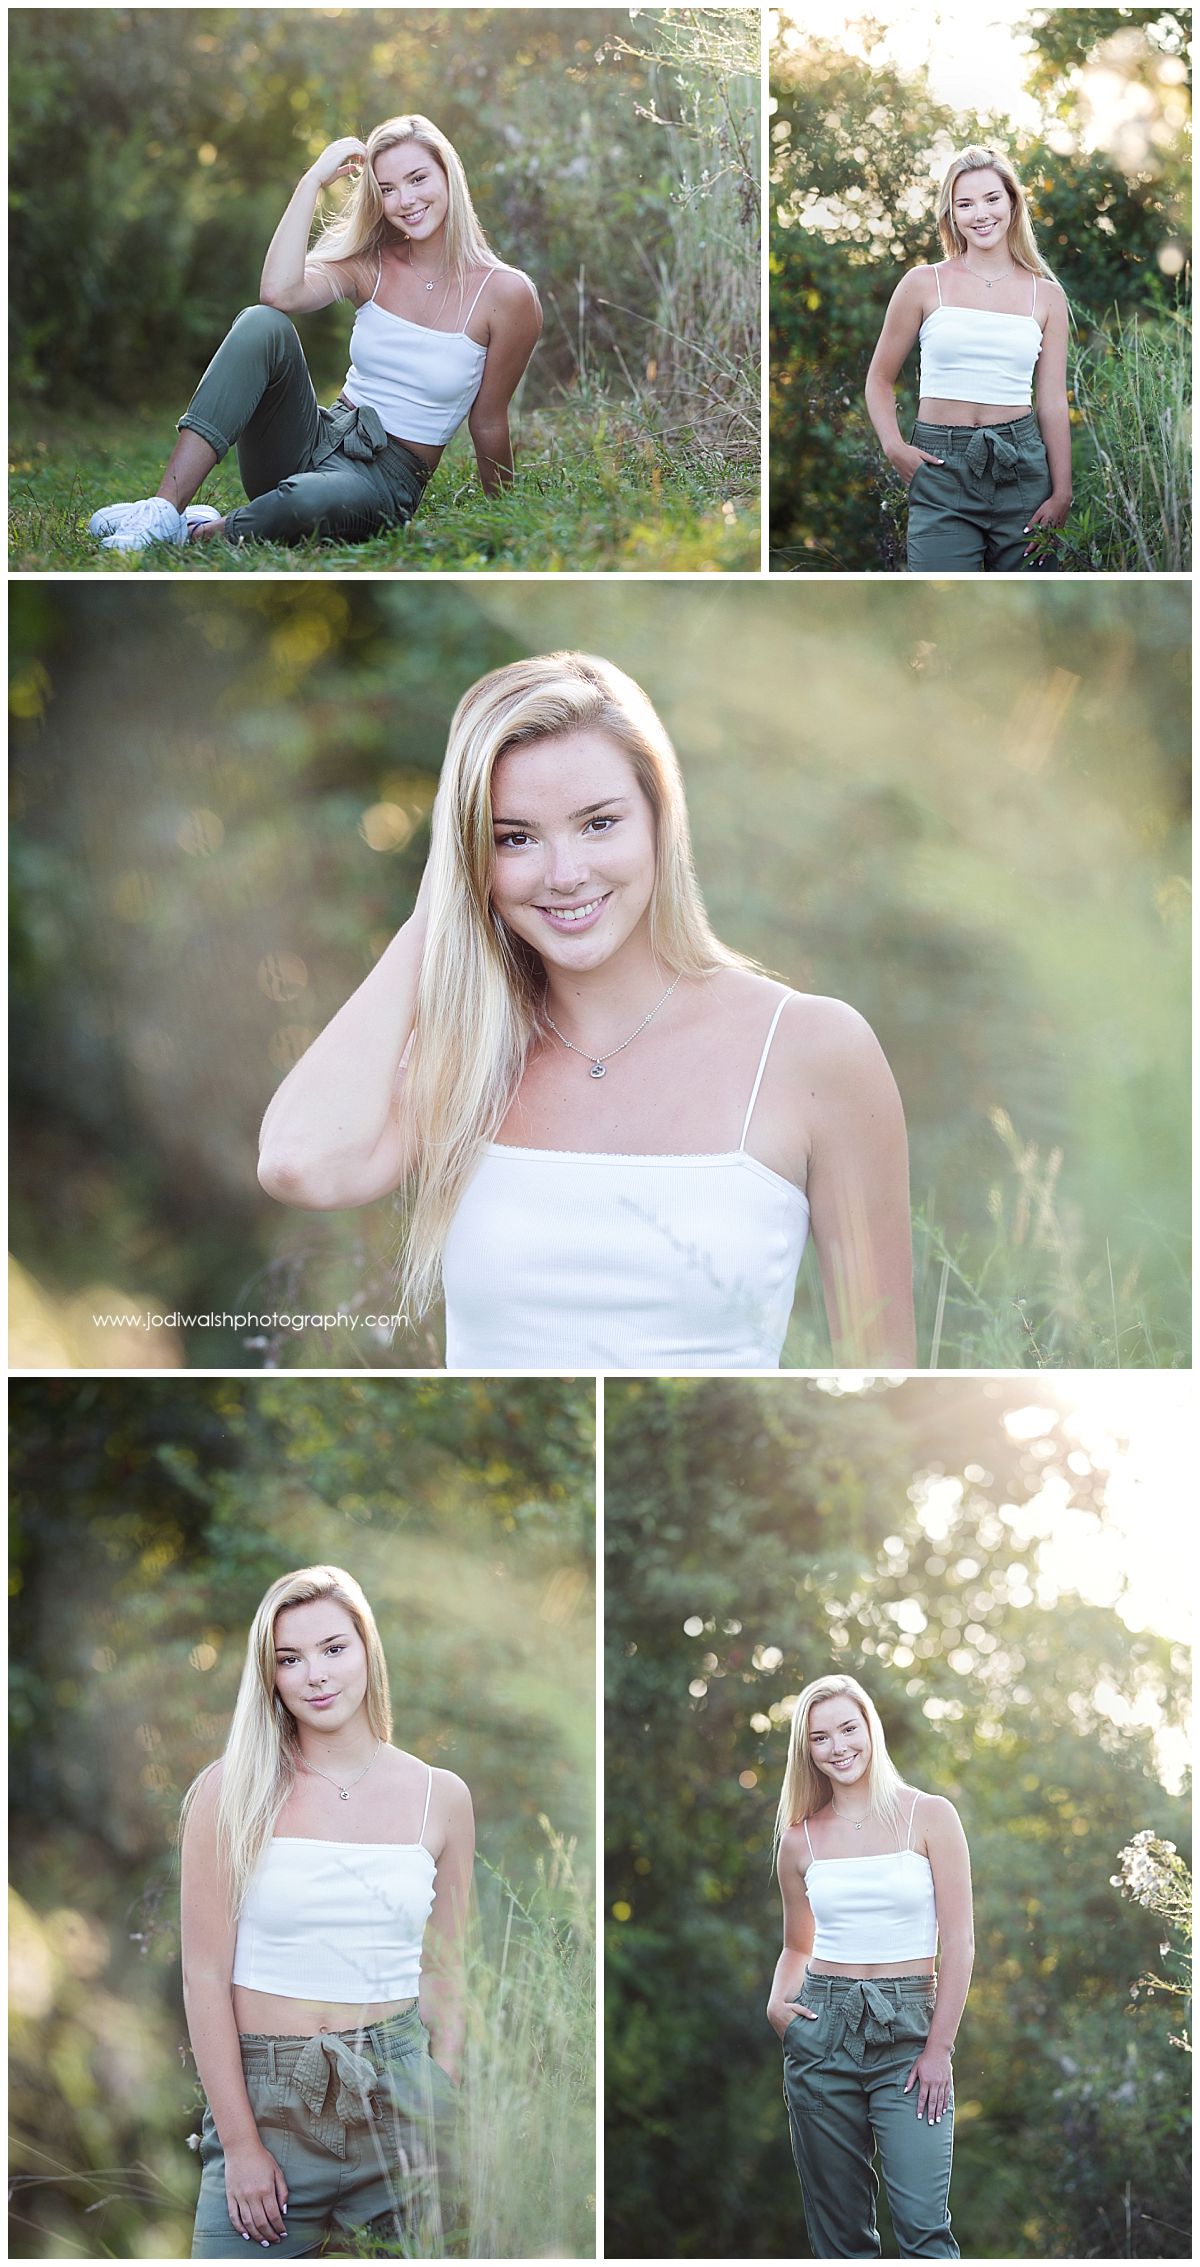 A senior portrait collage of images from North Park in Pittsburgh. Senior girl is blond and wearing a white tank top and green cargo pants. She's smiling at the camera.